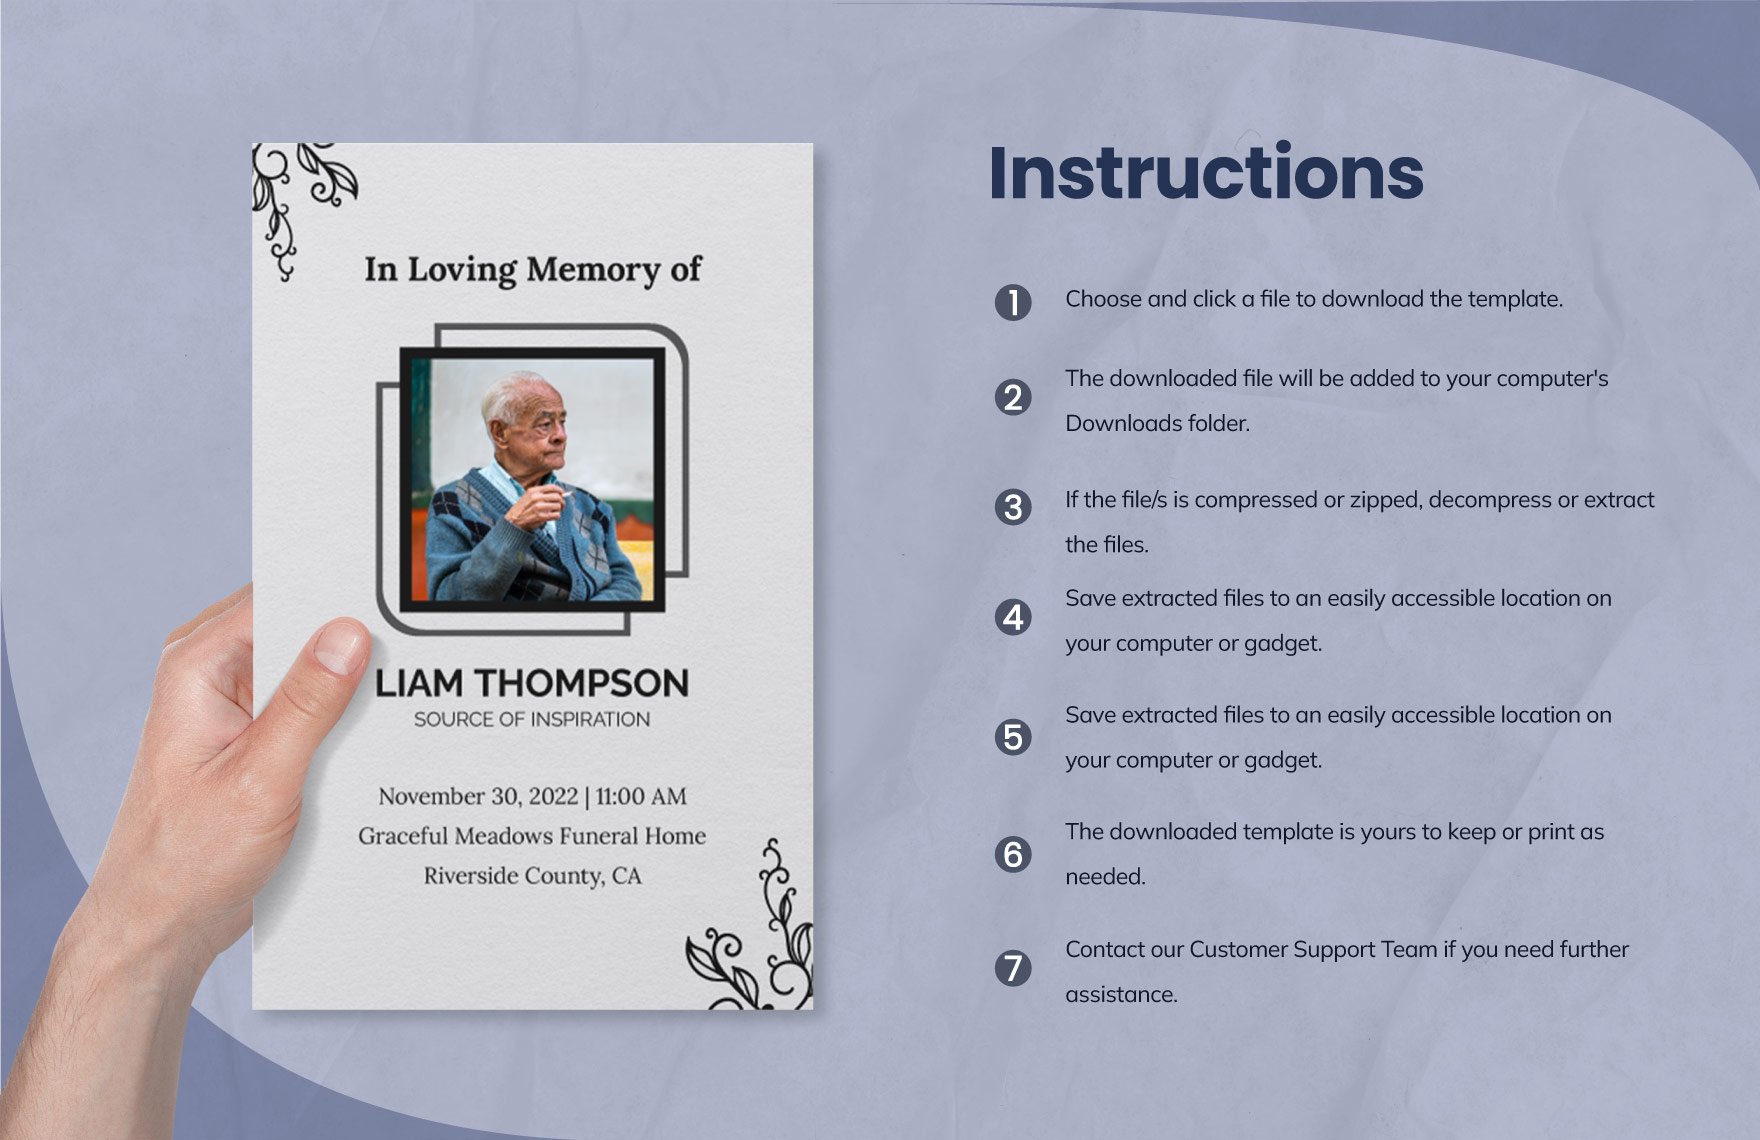 Obituary Template Word Doc Download